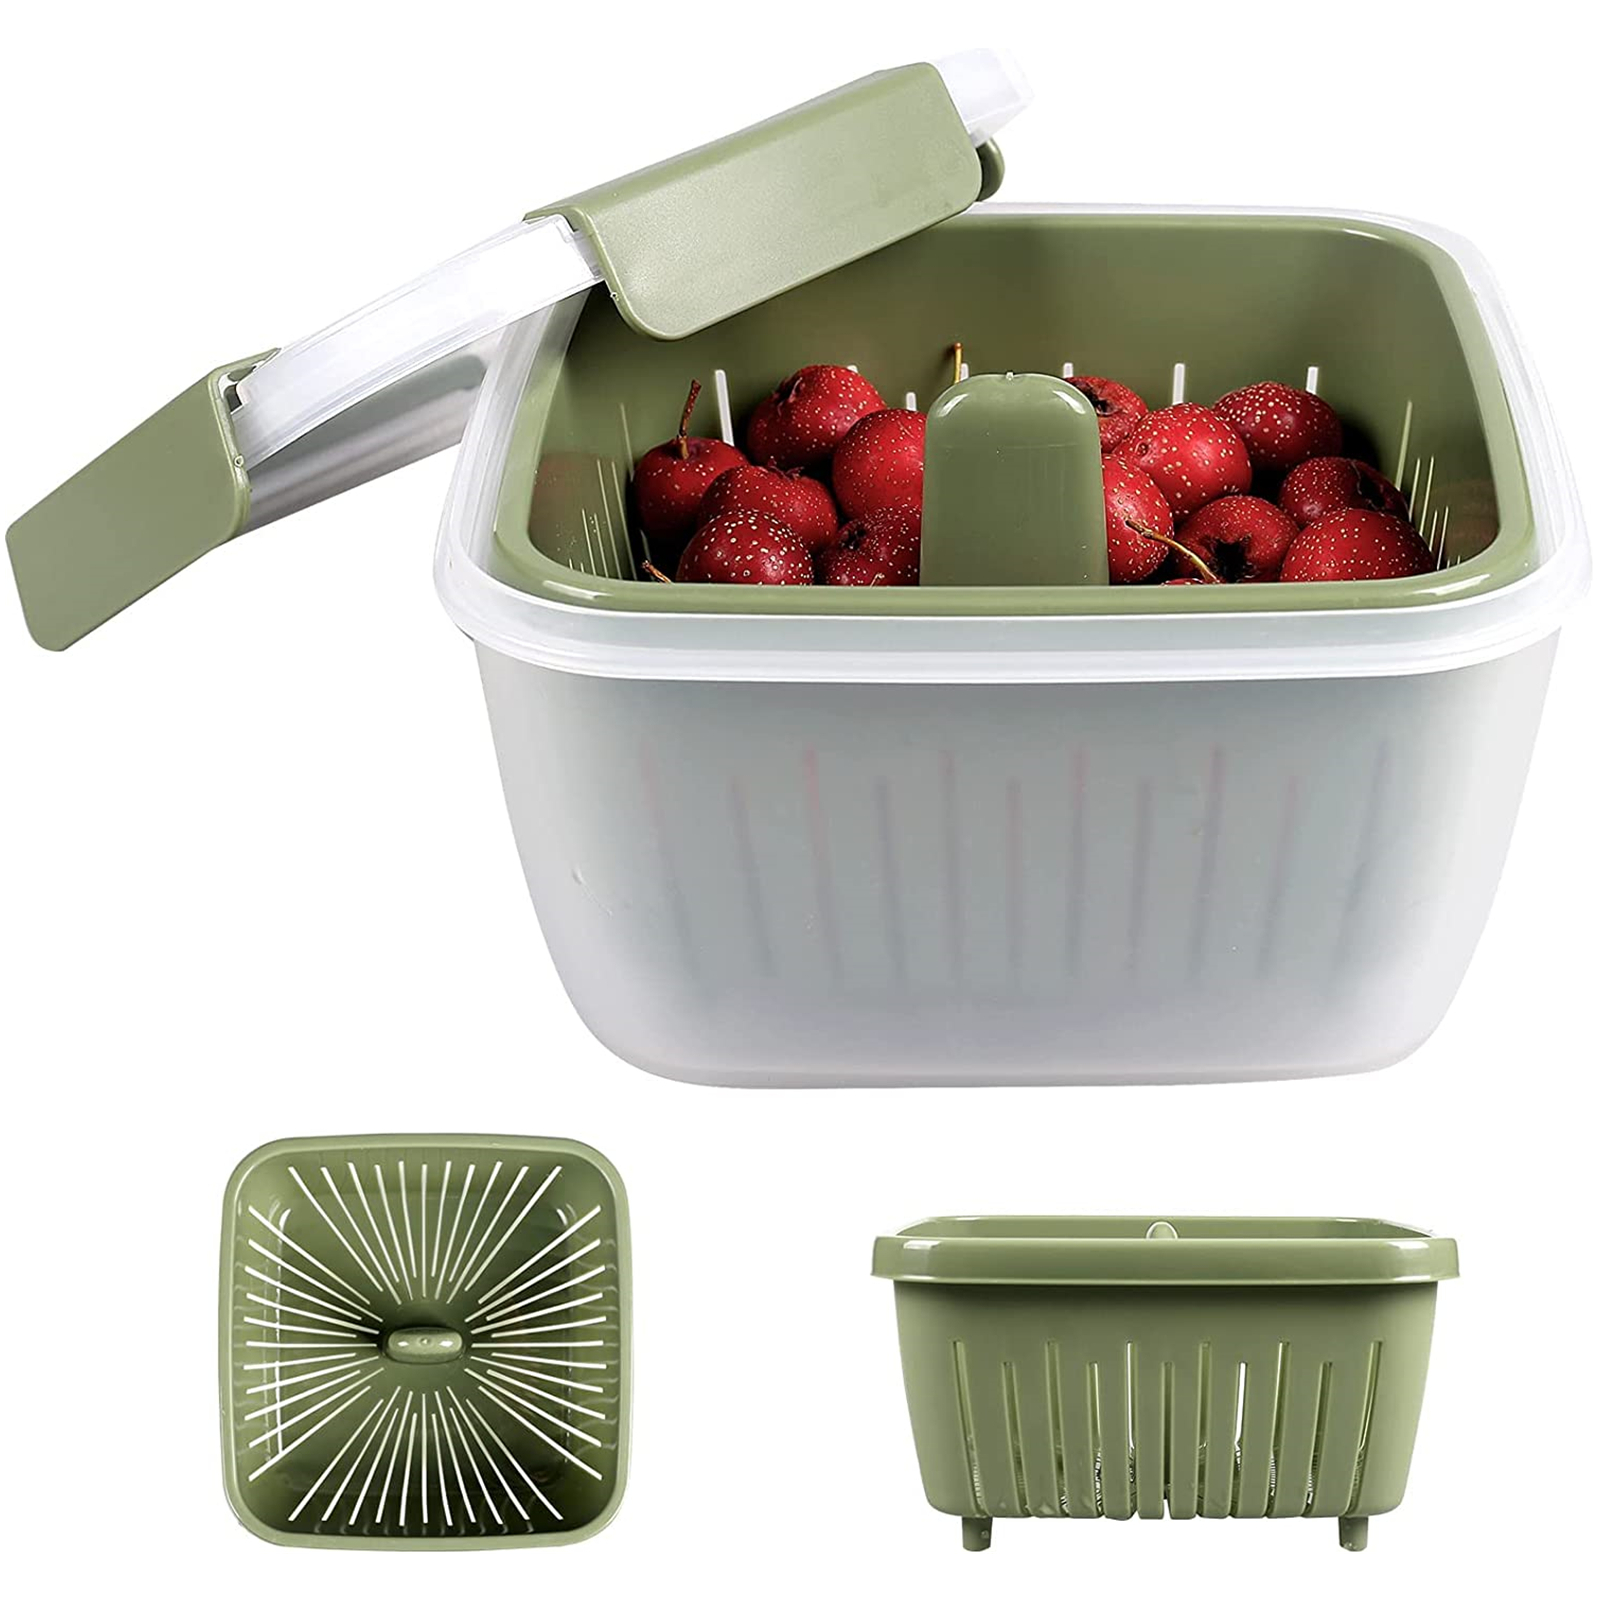 shopwithgreen 2 Pack 68oz Berry Keeper Container, Fruit Produce Saver Food Storage  Containers with Removable Drain Colanders, Vegetable Fresh Keeper Set, Refrigerator Organizer